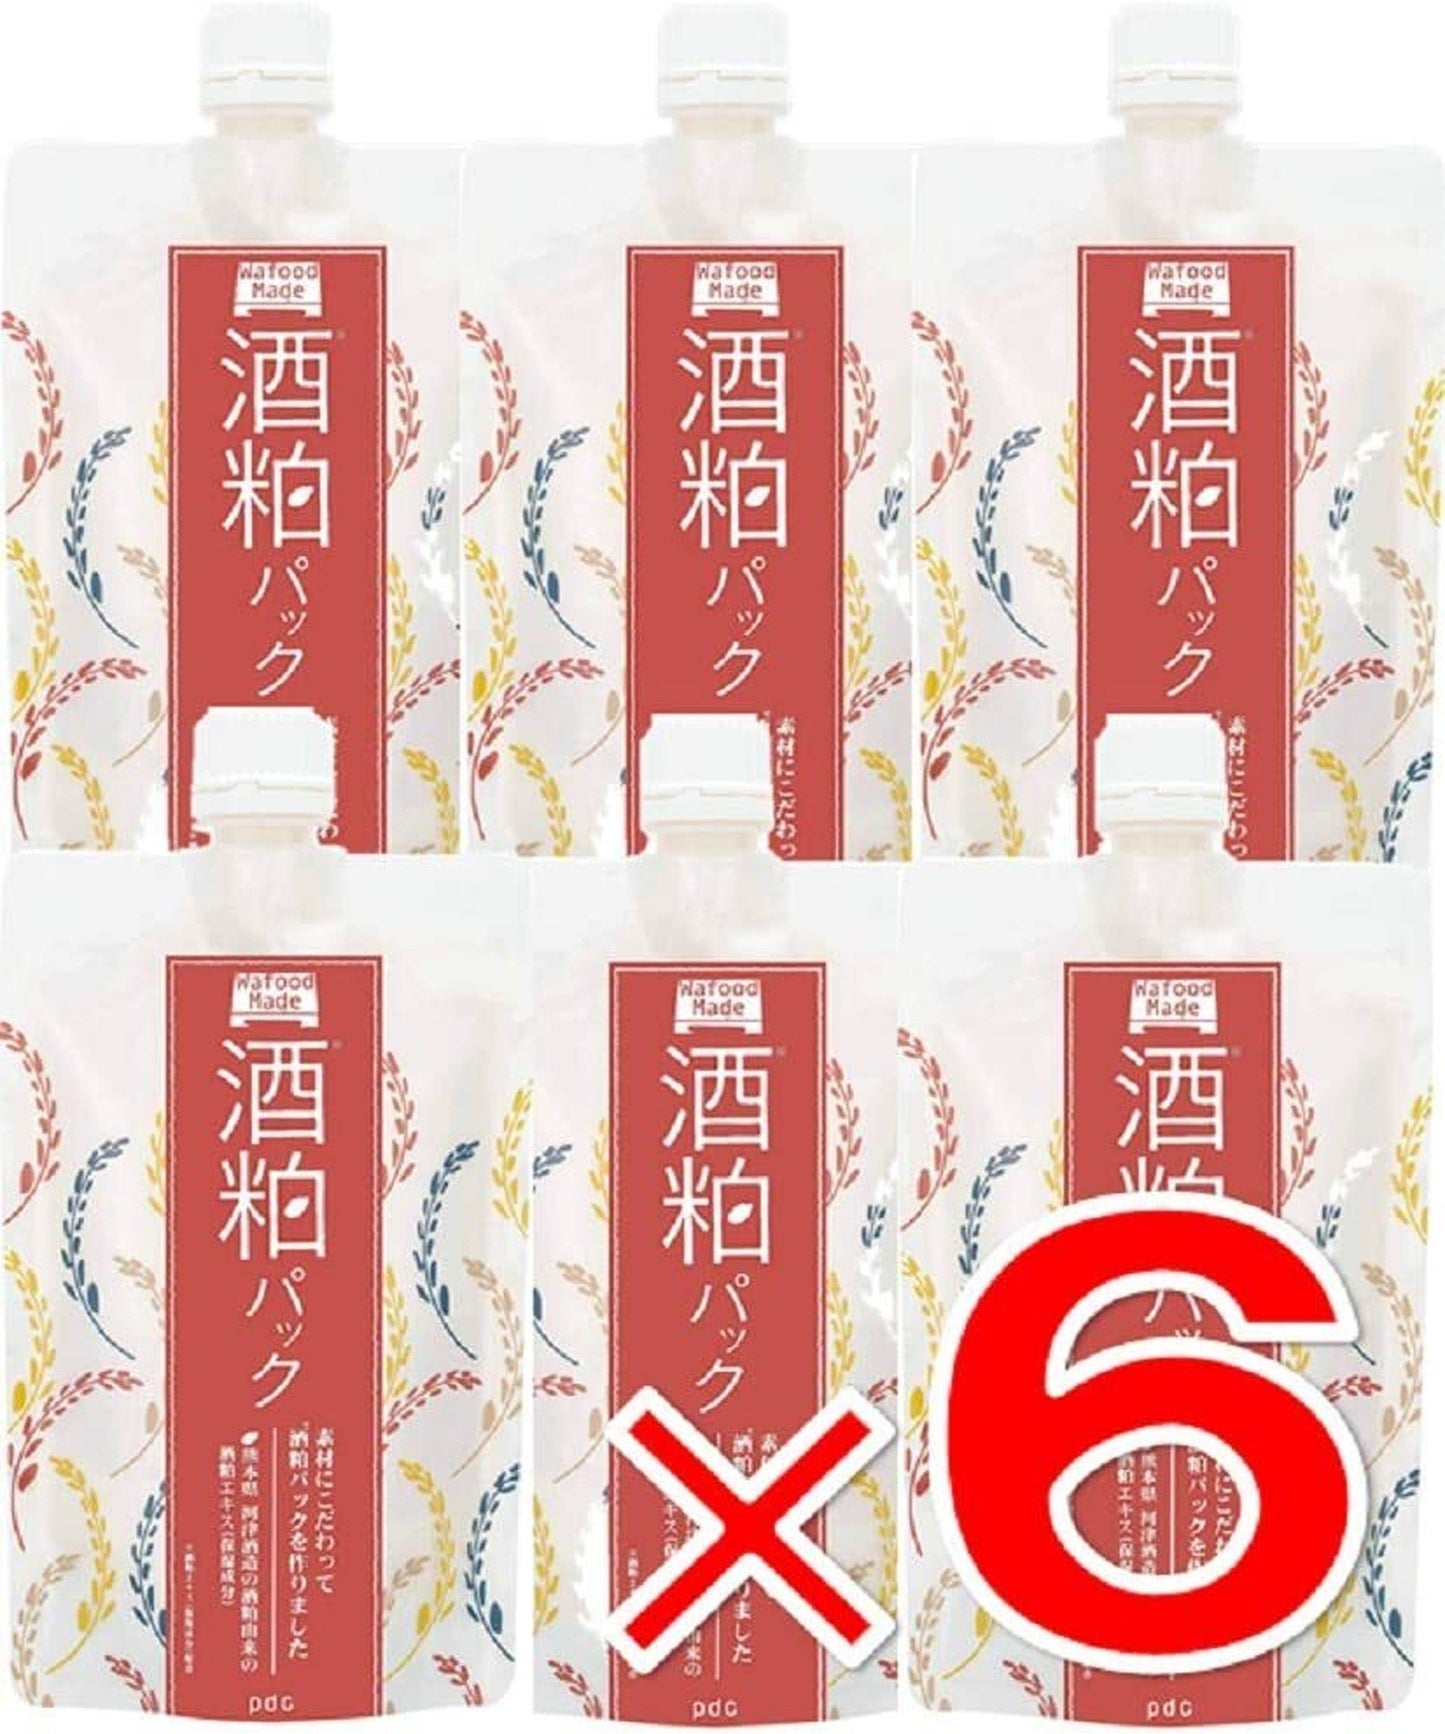 Set of 6 pdc Wafood Made sake lees pack 170g x 6 pieces Made in Japan Rinse off type JAN:4961989409016